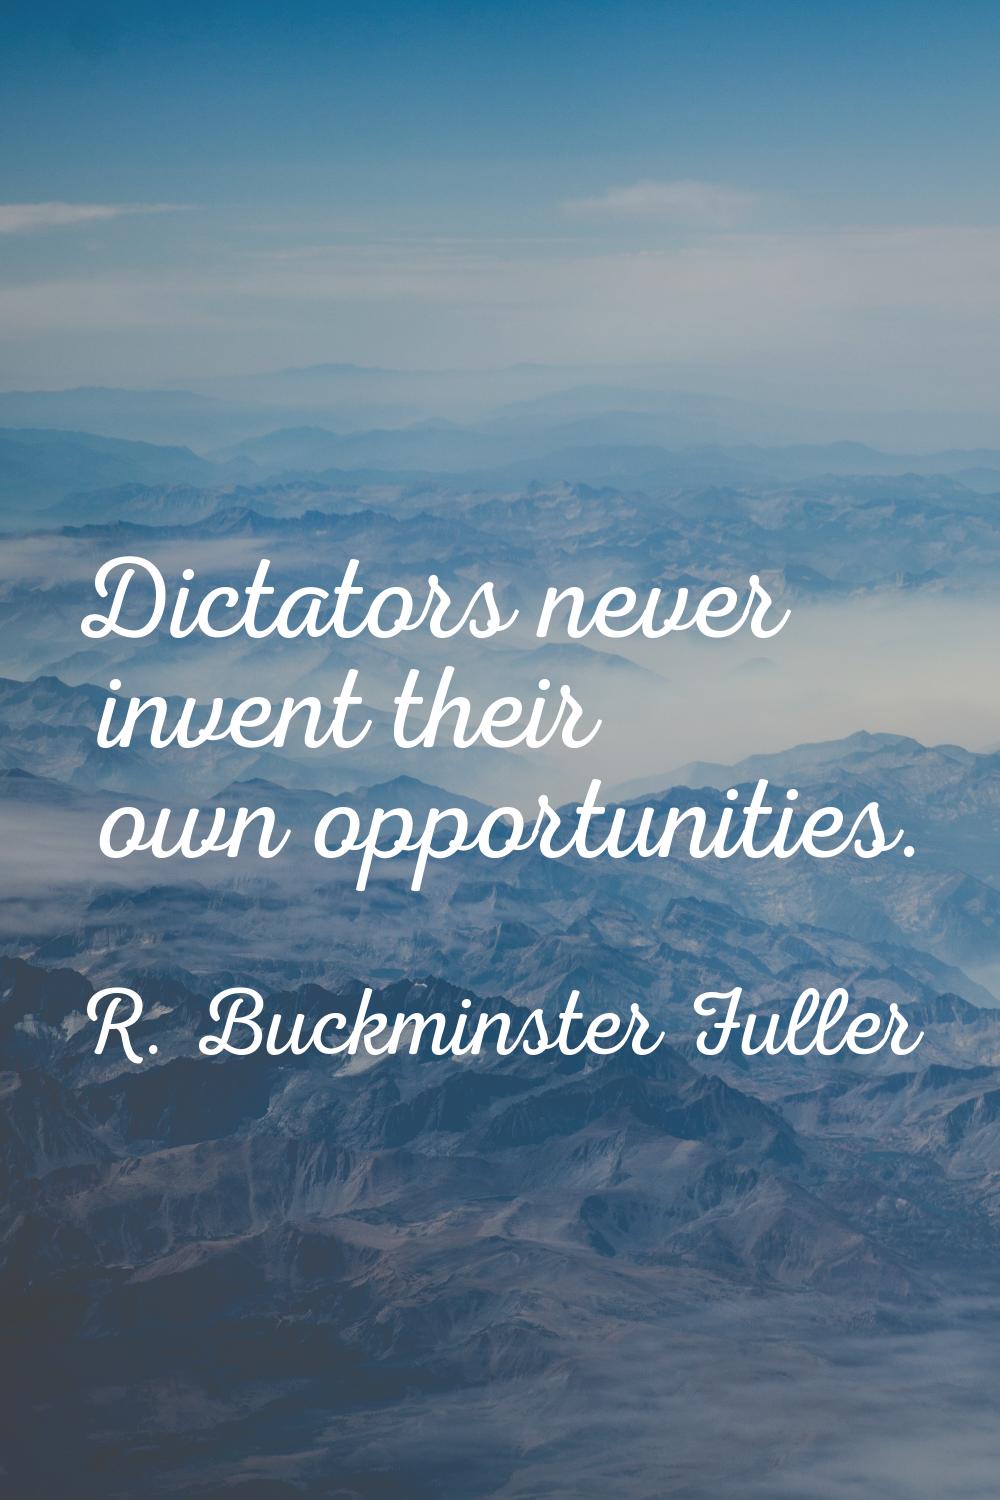 Dictators never invent their own opportunities.